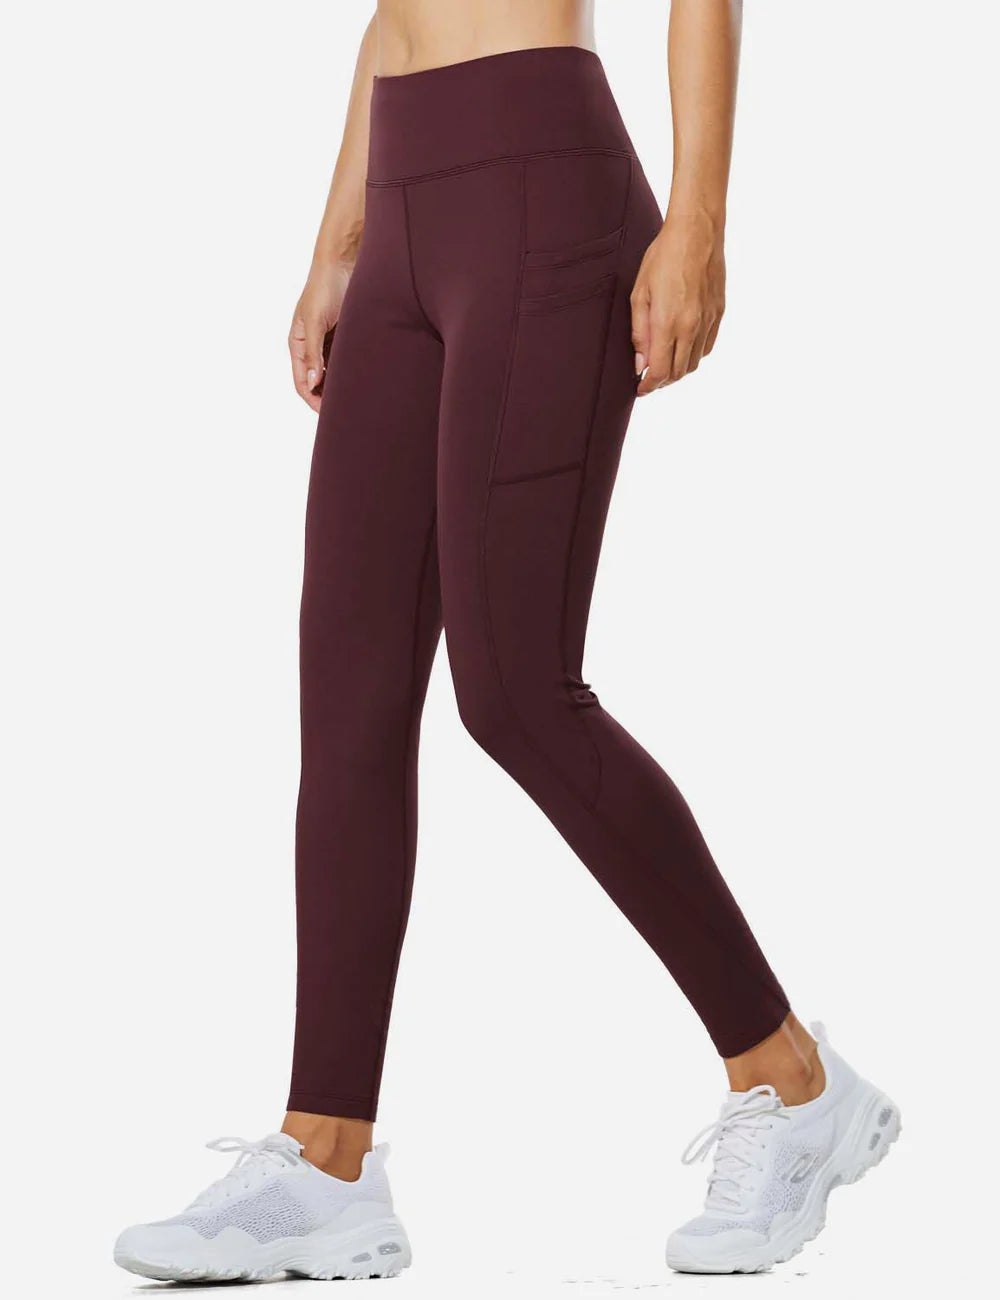 The Dos and Don'ts of Wearing Work Leggings in the Office – Baleaf Sports